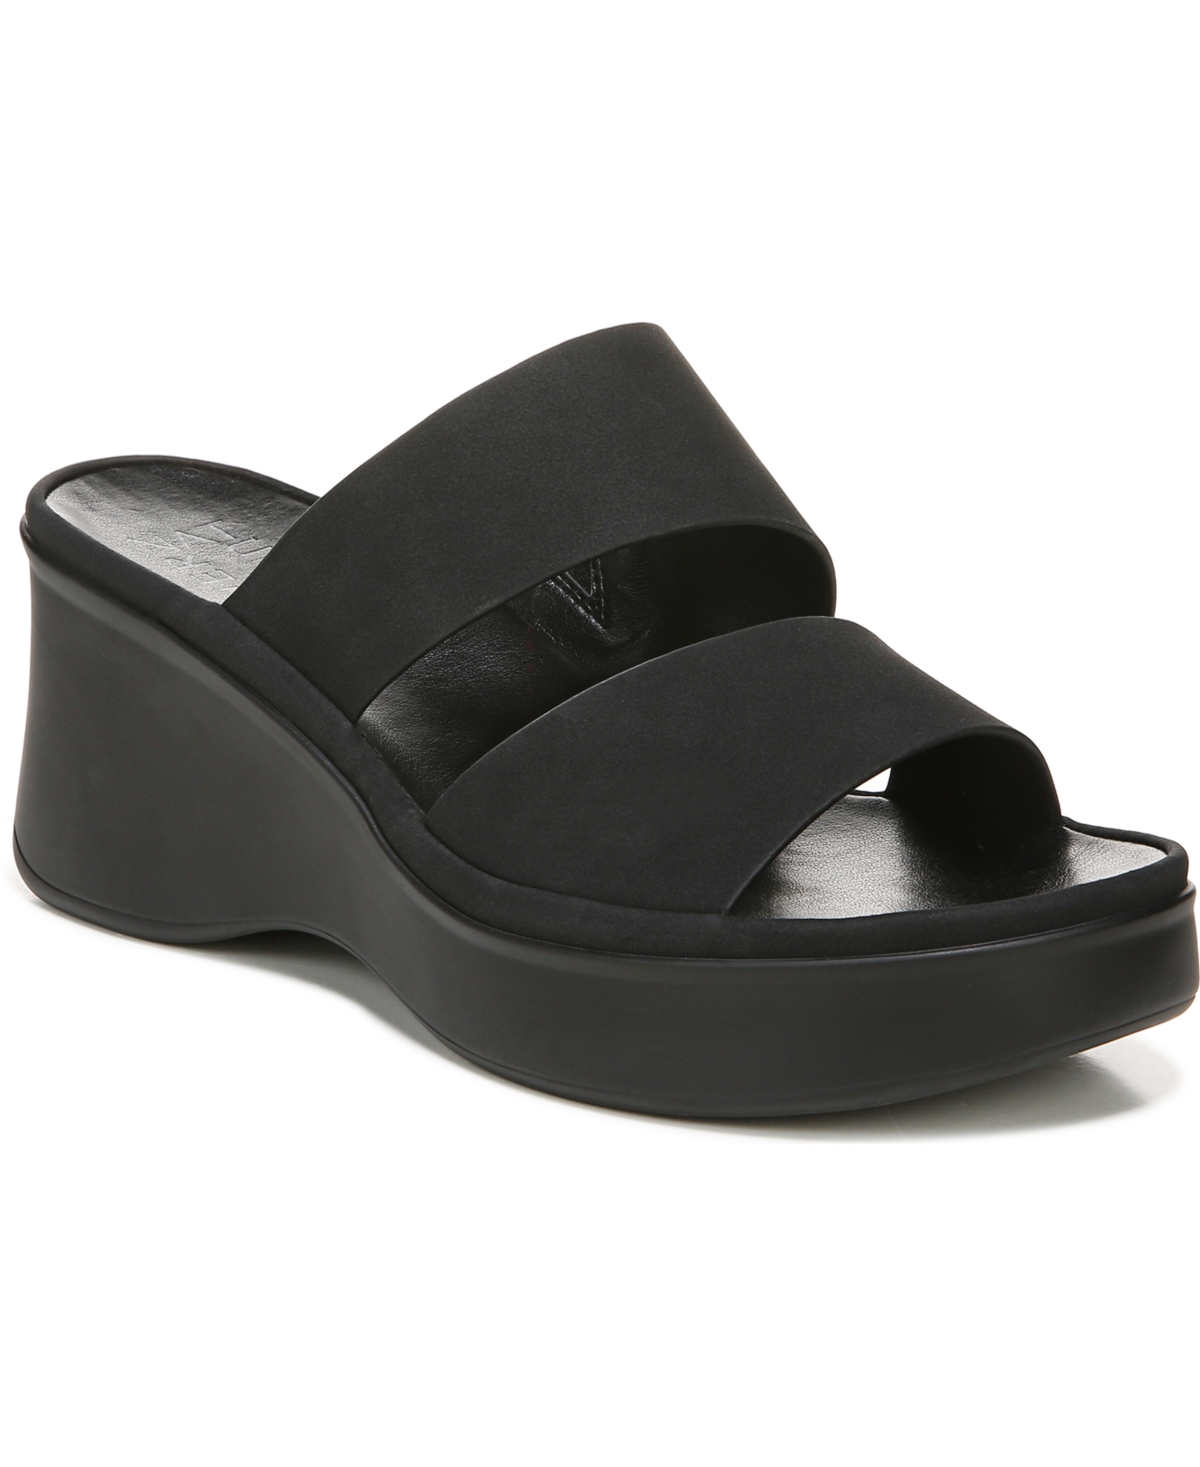 Naturalizer Genn-rally Slide Wedge Sandals Women's Shoes In Black Faux ...